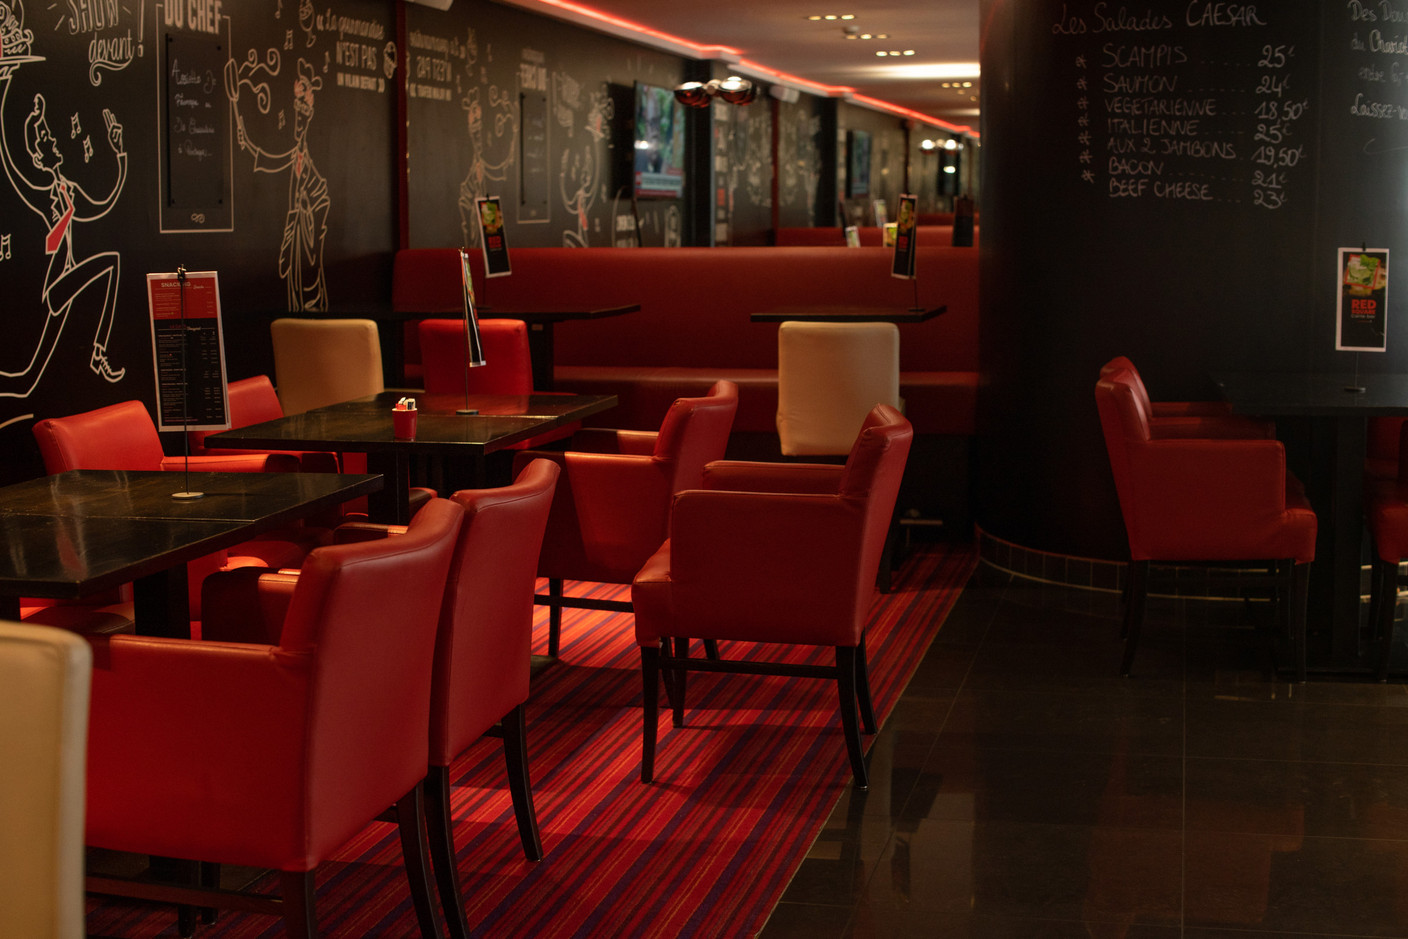 The Red Square at the Novotel Centre offers a well-crafted combination of gourmet cuisine and successful afterwork events. Maison Moderne